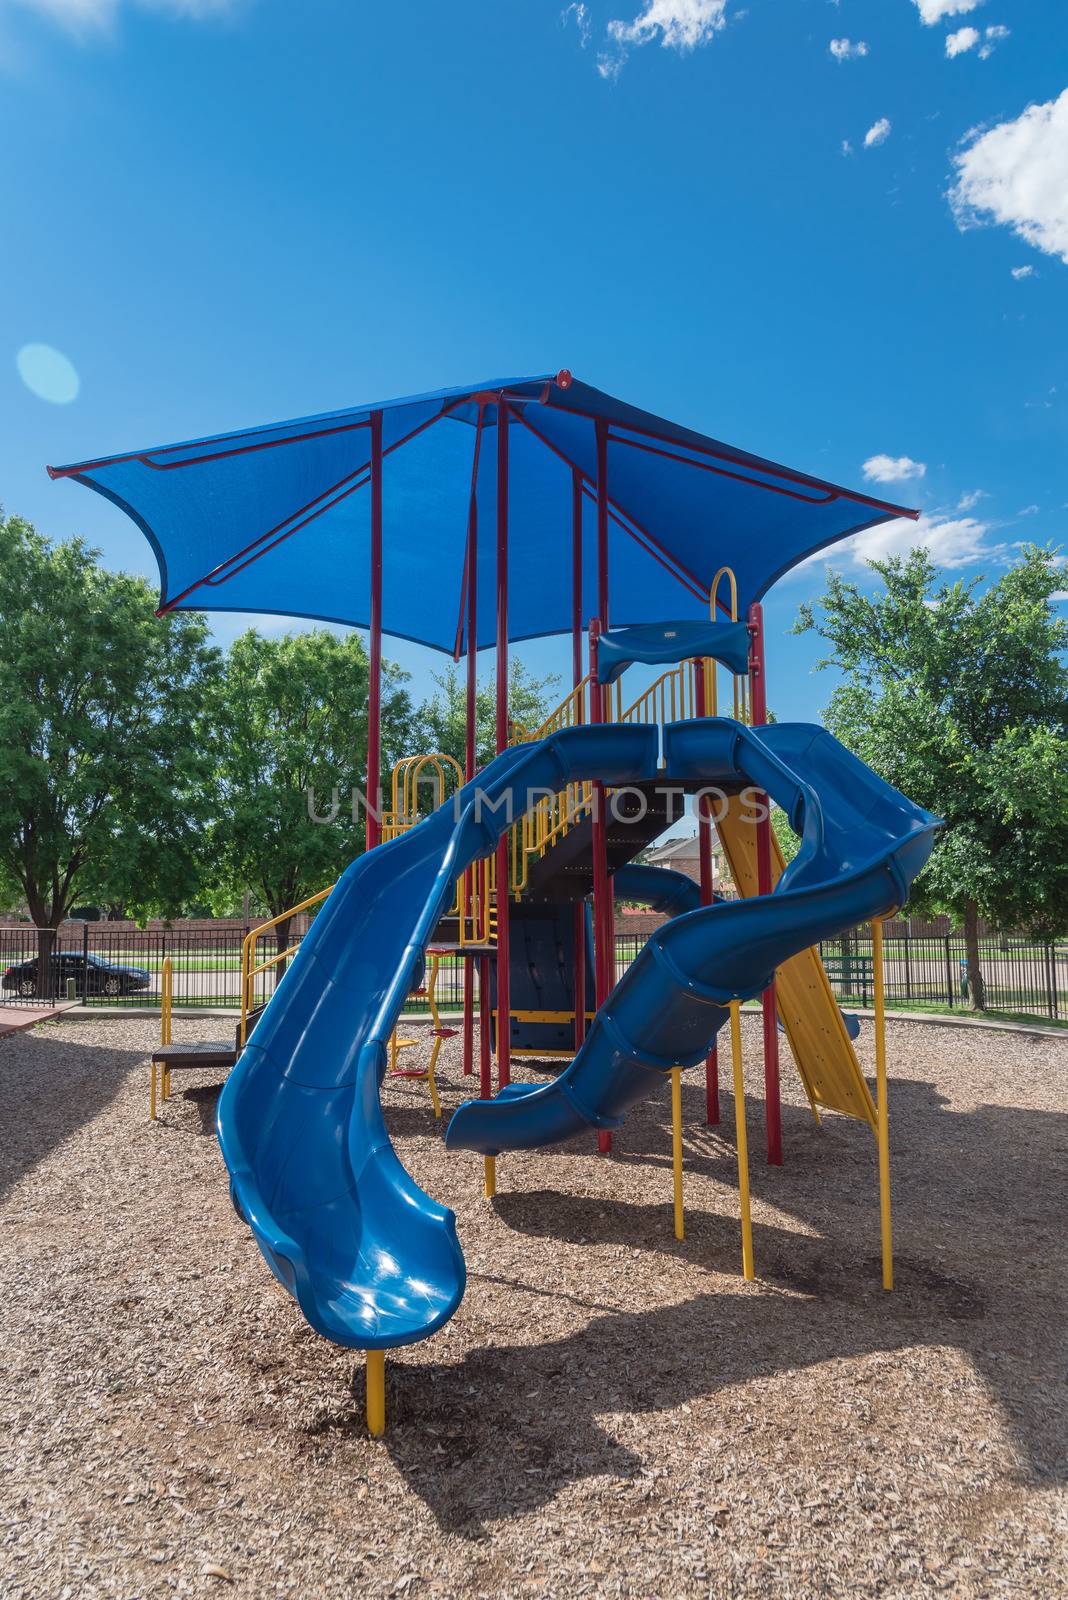 Neighborhood playground with colorful structure equipment near Dallas, Texas by trongnguyen